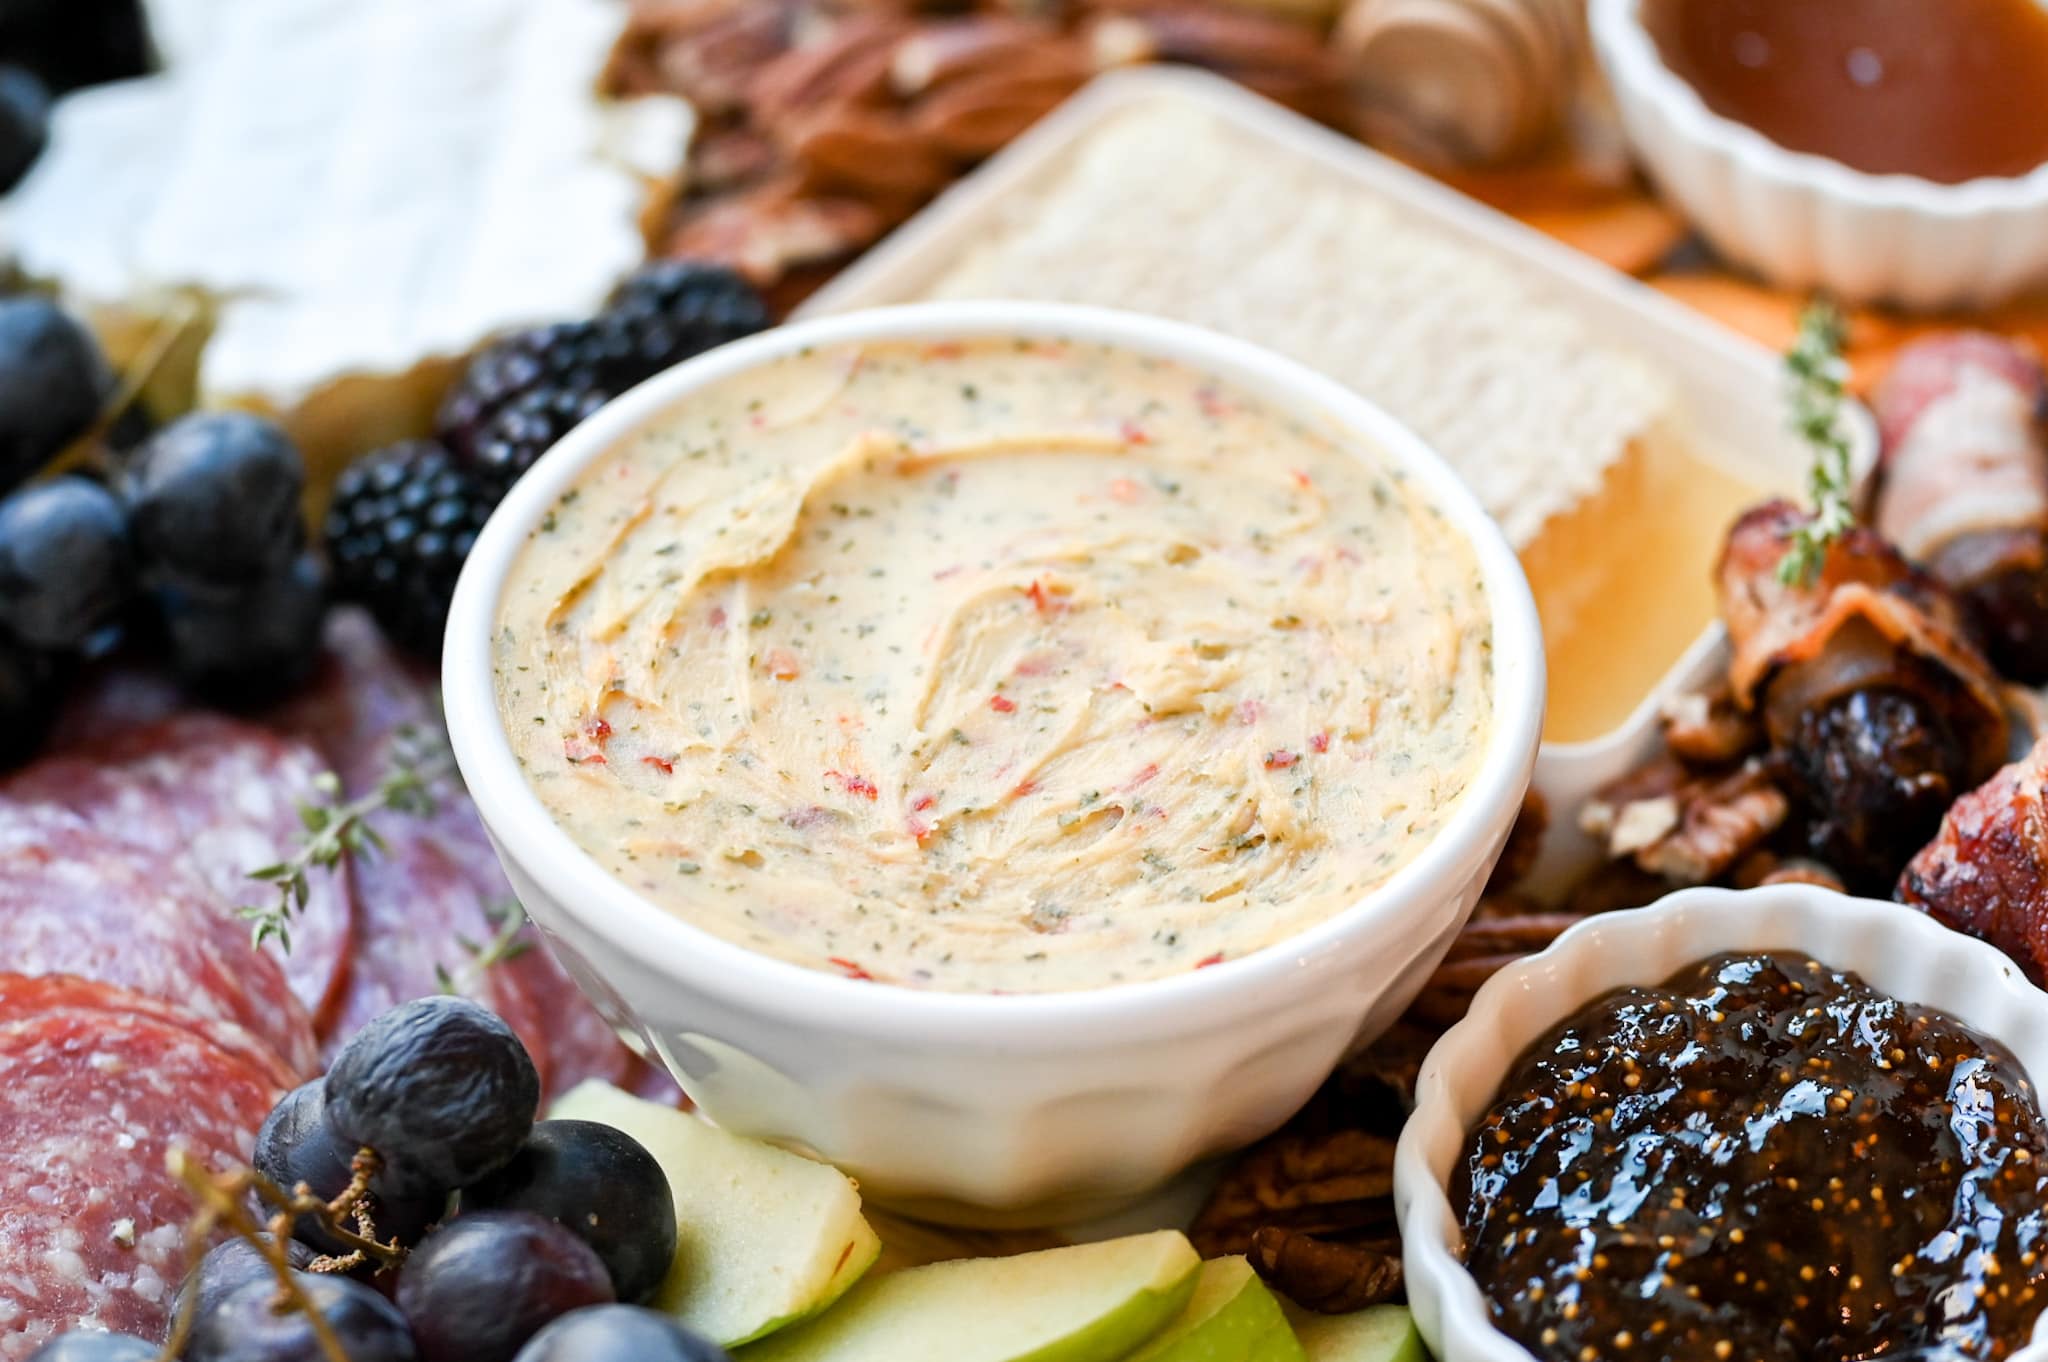 hot pepper cheese dip in a white bowl, in the center of the charcuterie board